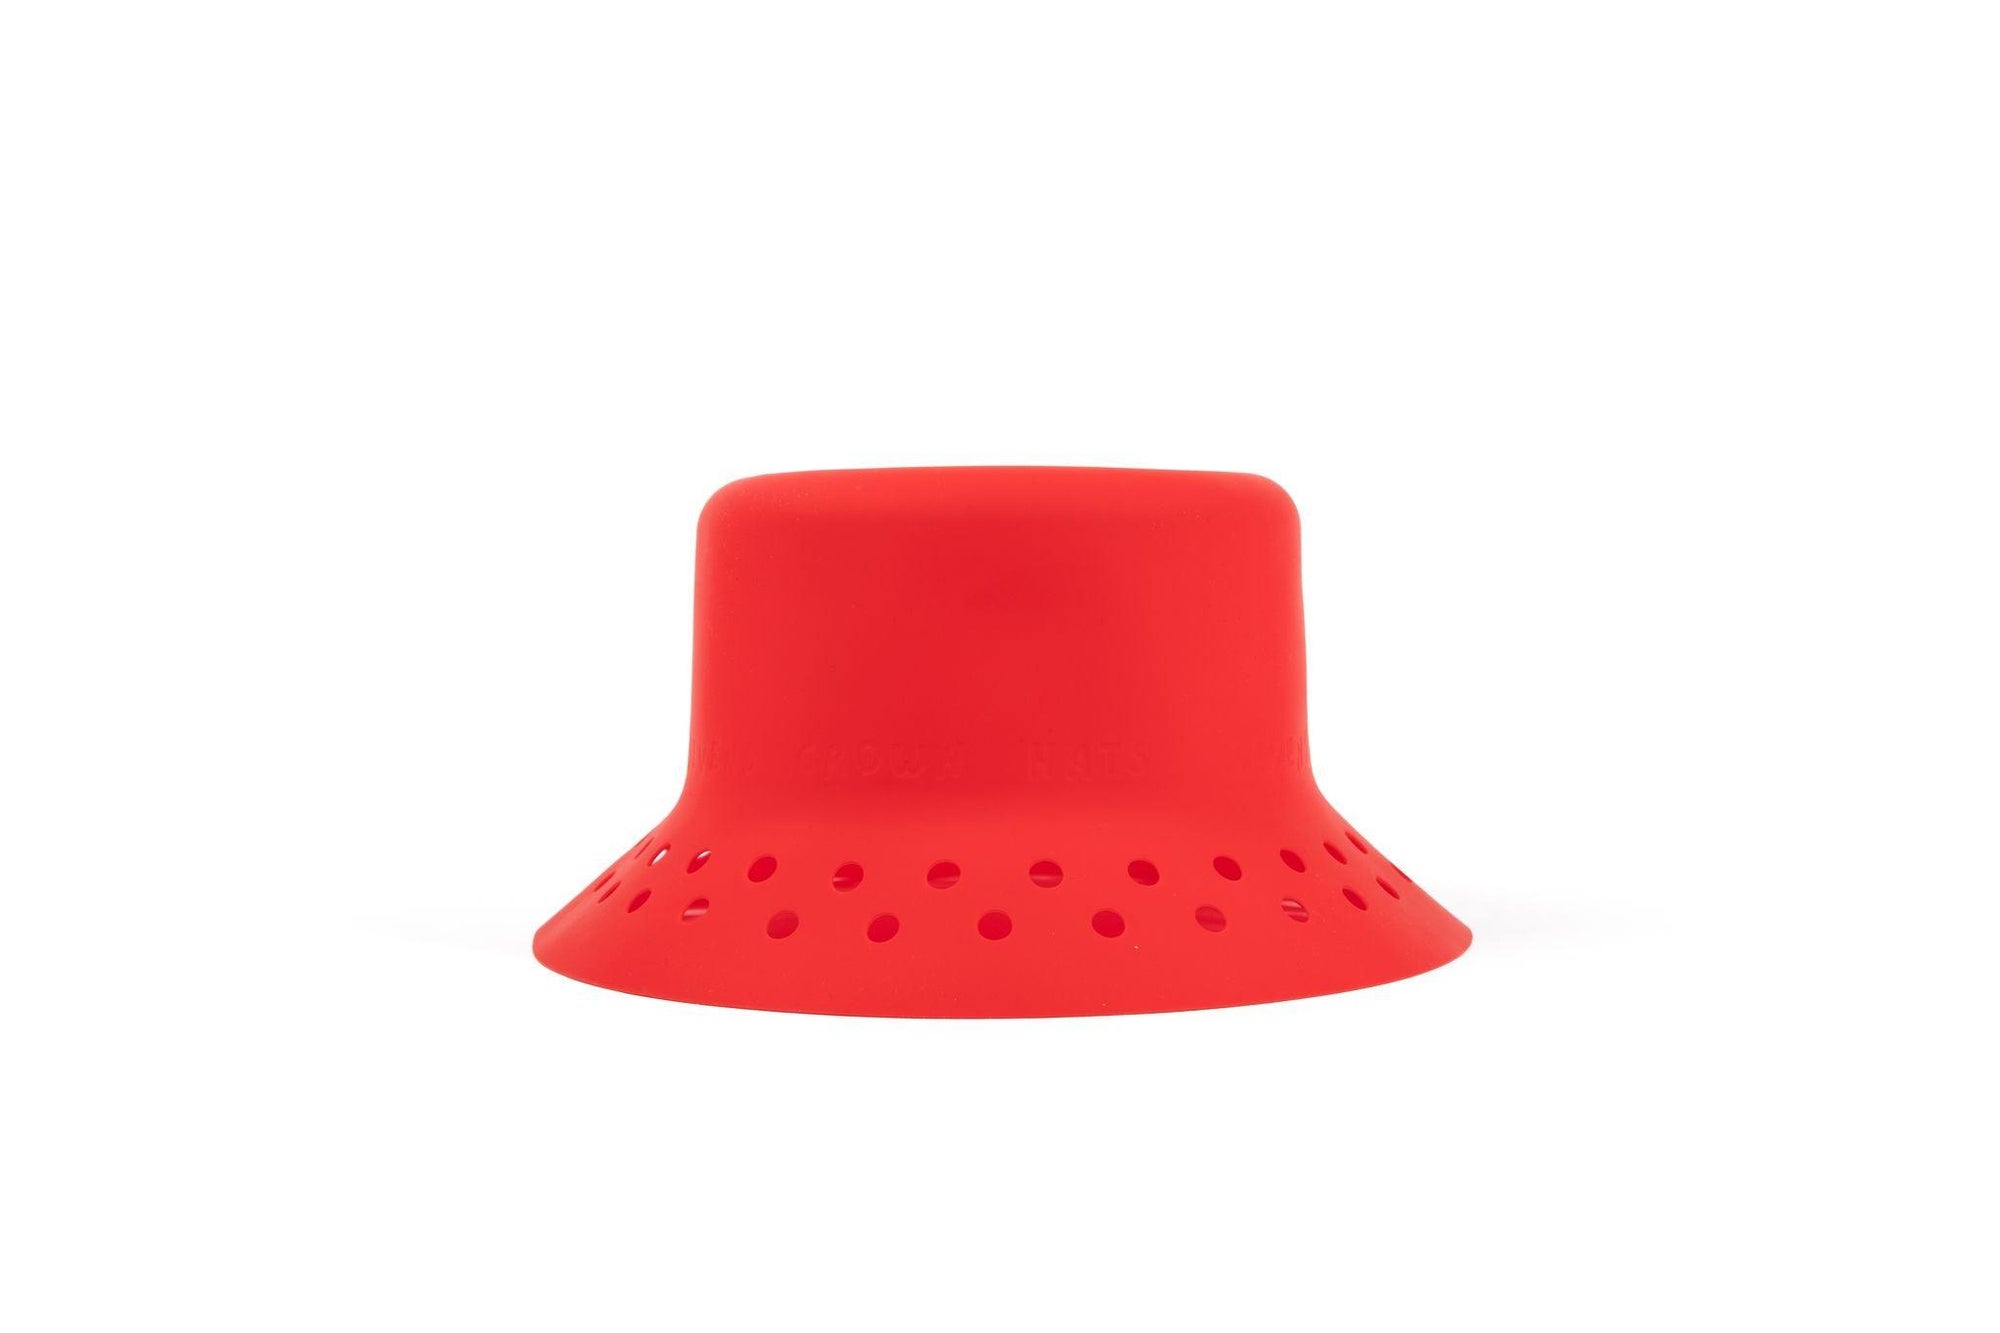 Sevens Crown Hat in Poppy Red - Sevens Crown Hats